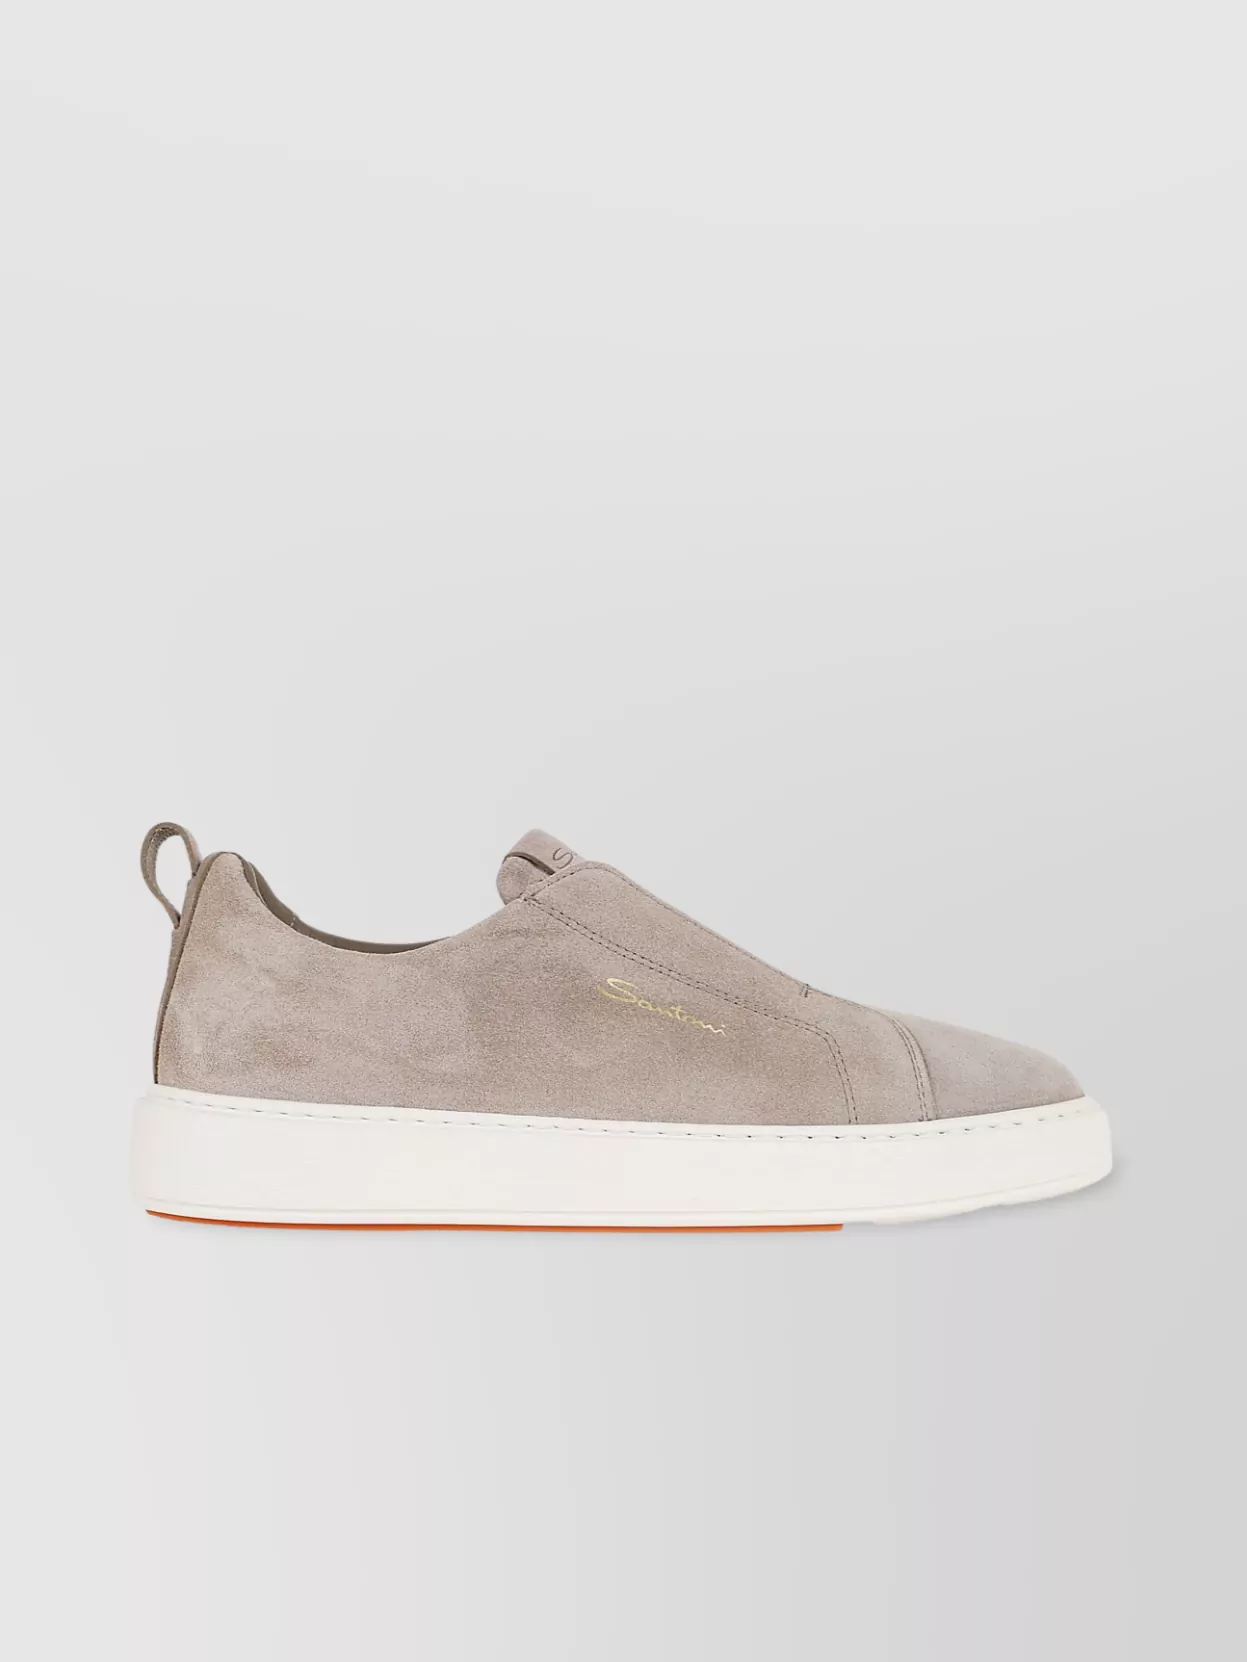 Santoni Round Toe Suede Sneakers With Elastic Panels In Neutral